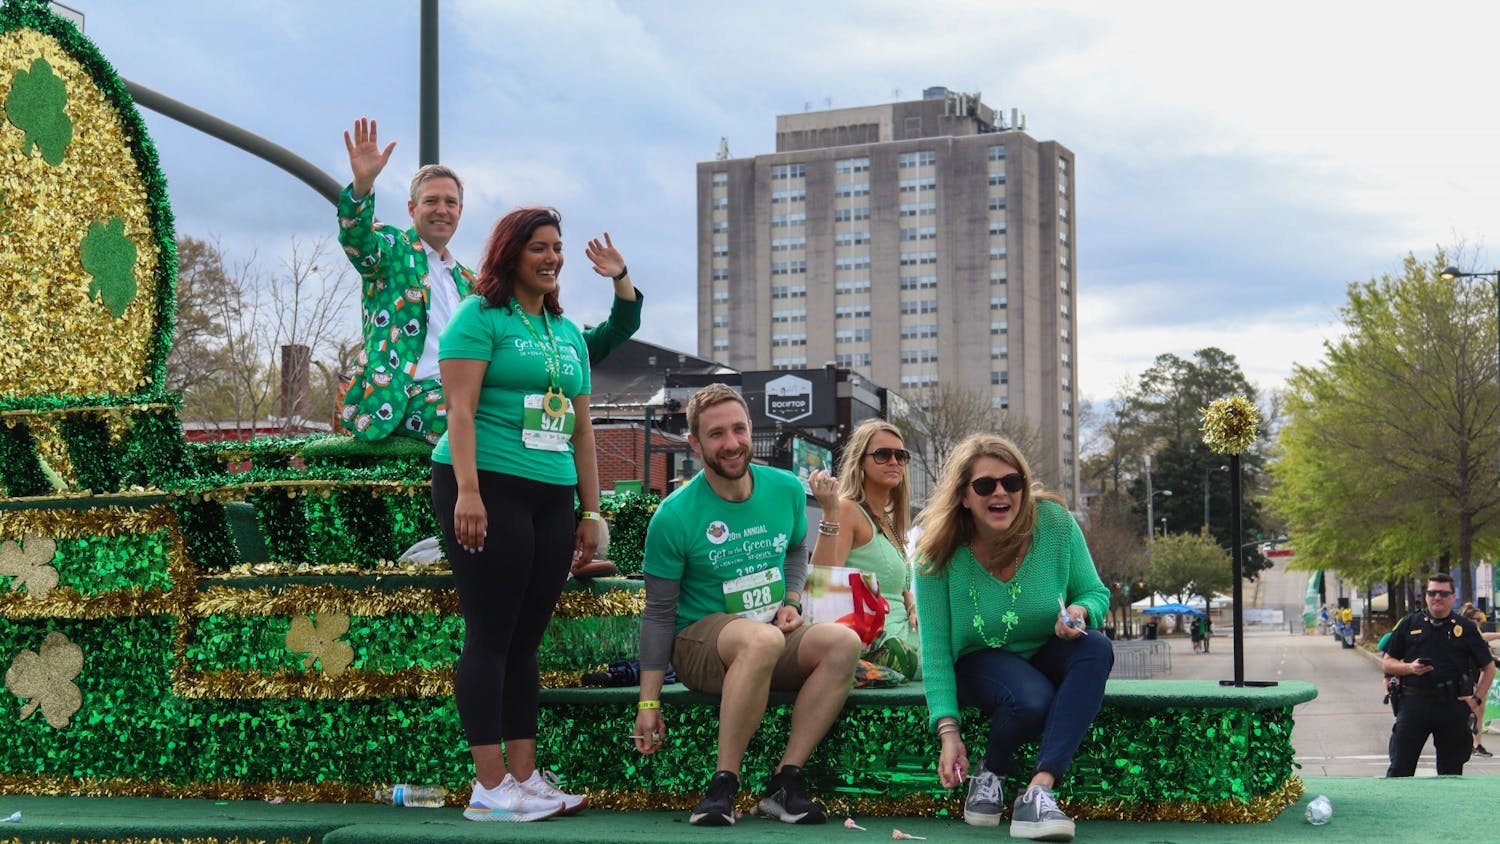 The grand marshal of the 40th Annual St. Pats in 5 Points Parade was Mayor Daniel Rickenmann (left). This edition of the parade was held Saturday, March 19, 2022.